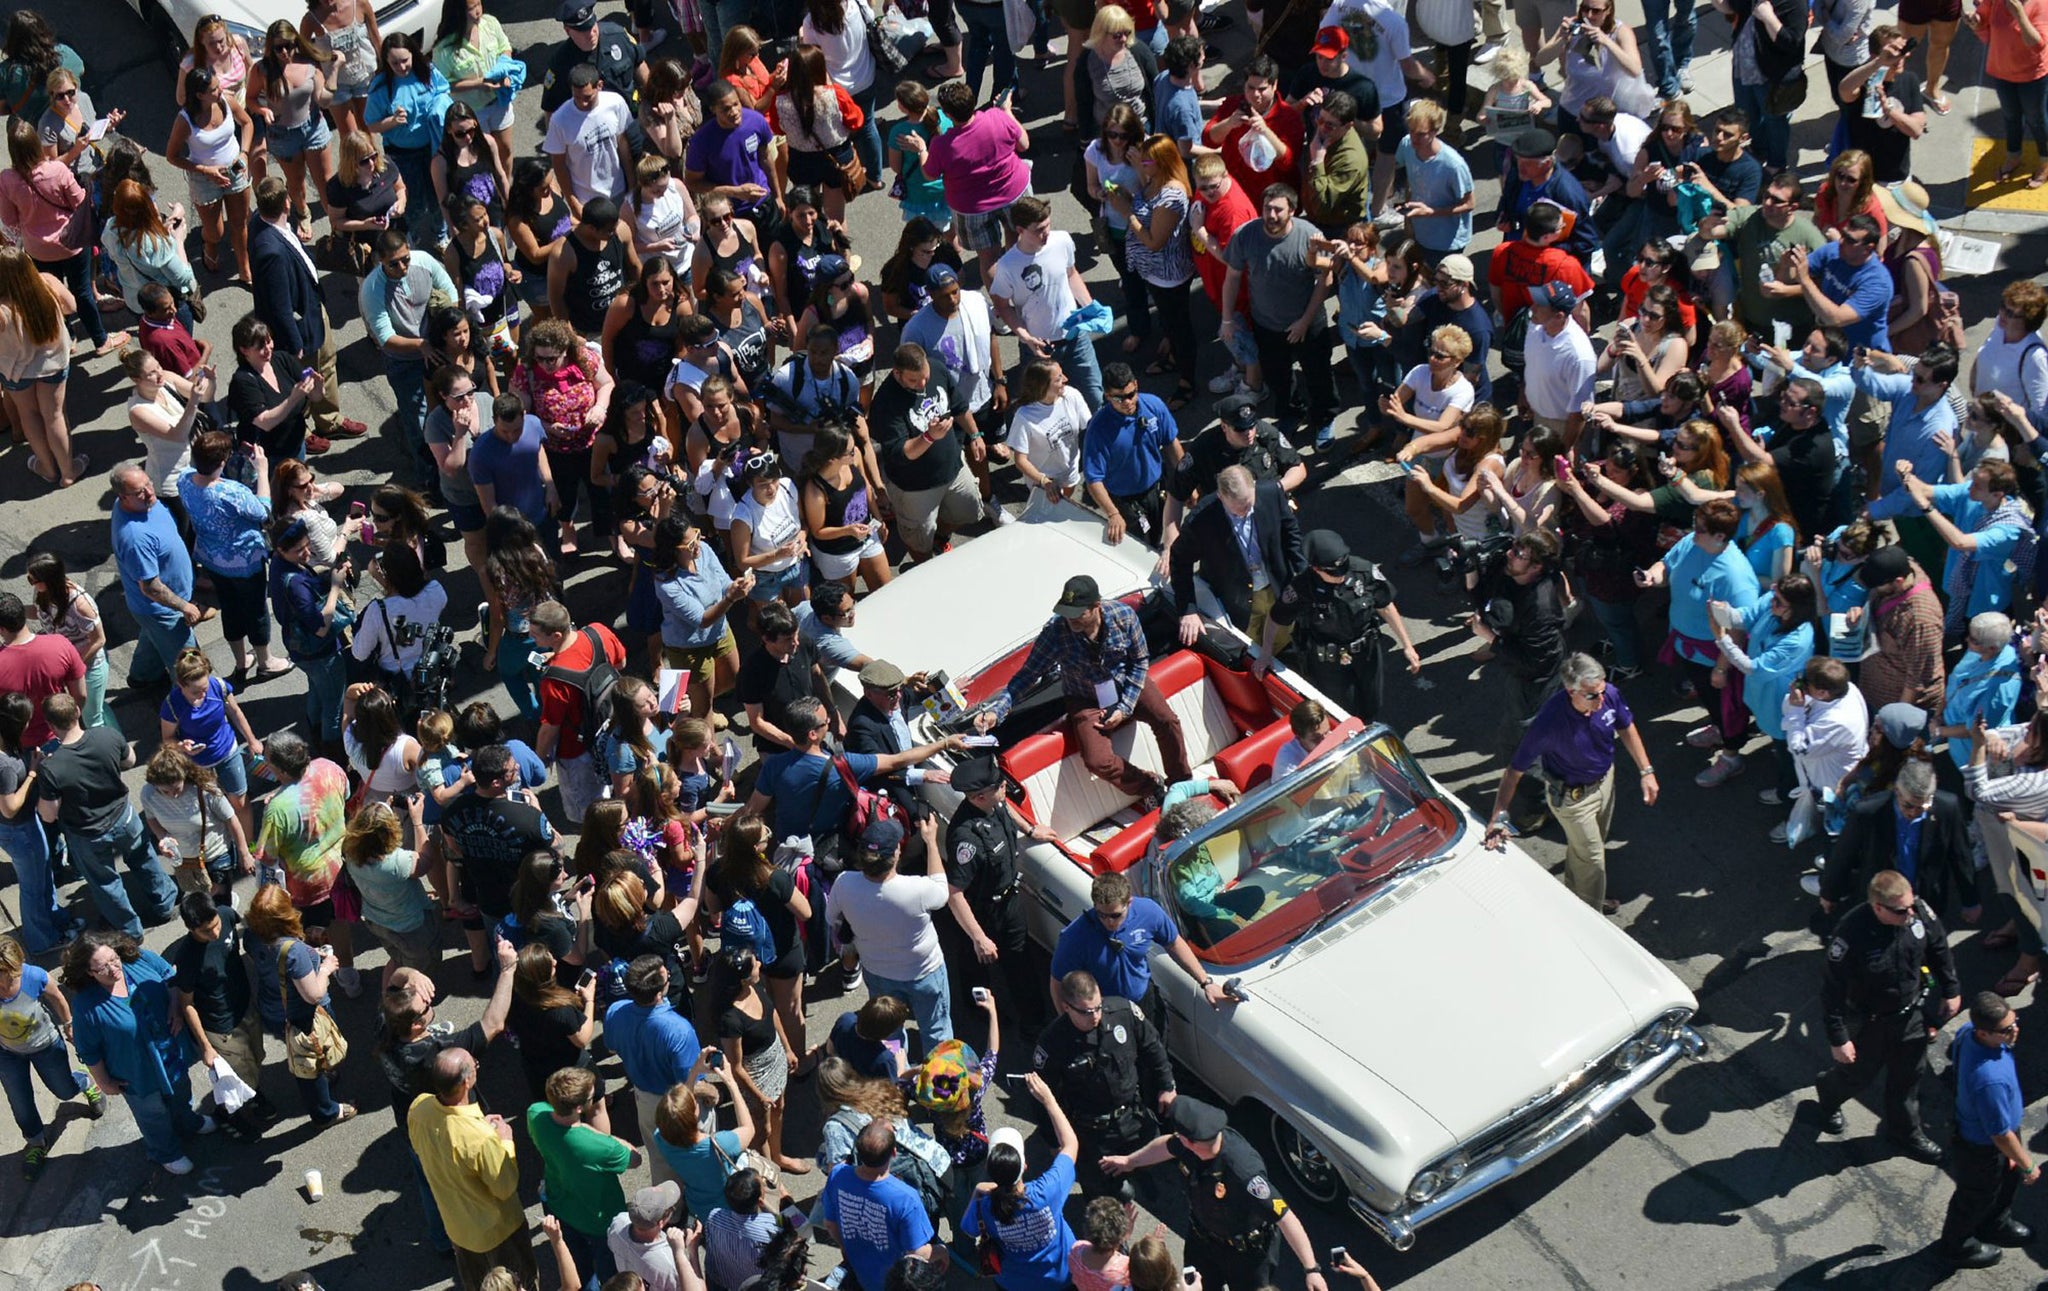 Rainn Wilson, from "The Office" is surrounded by fans during the parade from the University of Scranton to Courthouse Square, as part of "The Office" Wrap Party on May 4, 2013. -- Scranton Times-Tribune Archives